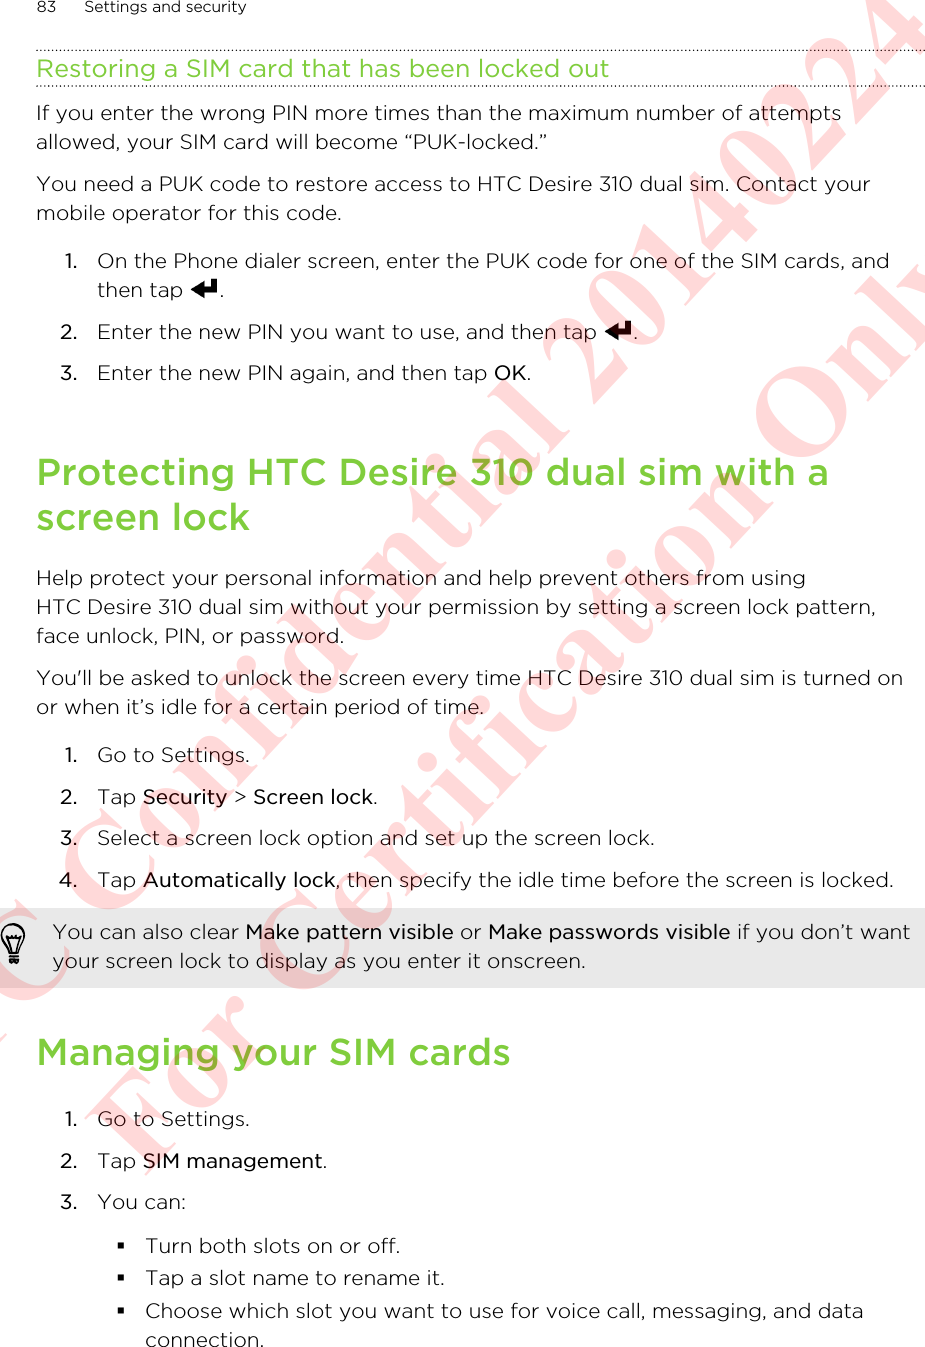 Restoring a SIM card that has been locked outIf you enter the wrong PIN more times than the maximum number of attemptsallowed, your SIM card will become “PUK-locked.”You need a PUK code to restore access to HTC Desire 310 dual sim. Contact yourmobile operator for this code.1. On the Phone dialer screen, enter the PUK code for one of the SIM cards, andthen tap  .2. Enter the new PIN you want to use, and then tap  .3. Enter the new PIN again, and then tap OK.Protecting HTC Desire 310 dual sim with ascreen lockHelp protect your personal information and help prevent others from usingHTC Desire 310 dual sim without your permission by setting a screen lock pattern,face unlock, PIN, or password.You&apos;ll be asked to unlock the screen every time HTC Desire 310 dual sim is turned onor when it’s idle for a certain period of time.1. Go to Settings.2. Tap Security &gt; Screen lock.3. Select a screen lock option and set up the screen lock.4. Tap Automatically lock, then specify the idle time before the screen is locked. You can also clear Make pattern visible or Make passwords visible if you don’t wantyour screen lock to display as you enter it onscreen.Managing your SIM cards1. Go to Settings.2. Tap SIM management.3. You can:§Turn both slots on or off.§Tap a slot name to rename it.§Choose which slot you want to use for voice call, messaging, and dataconnection.83 Settings and securityHTC Confidential 20140224 For Certification Only